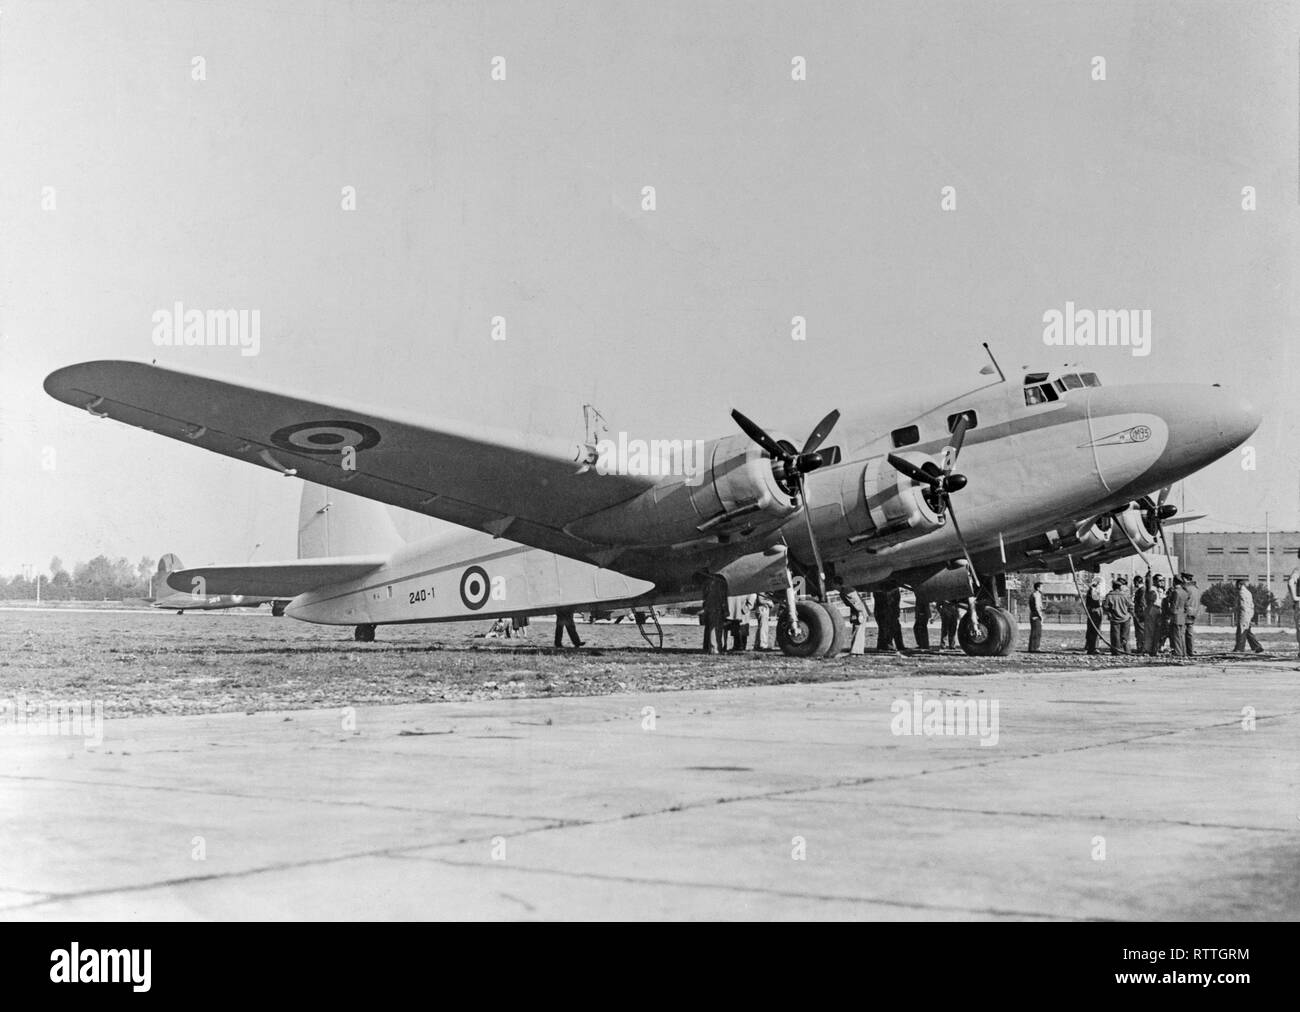 The Savoia-Marchetti SM.95 was an Italian four-engine, mid-range transport aircraft, which first flew in 1943. A total of 20 aircraft were produced between 1943 and 1949. This aircraft, serial number 240-1, is of the Italian Air Force. Stock Photo